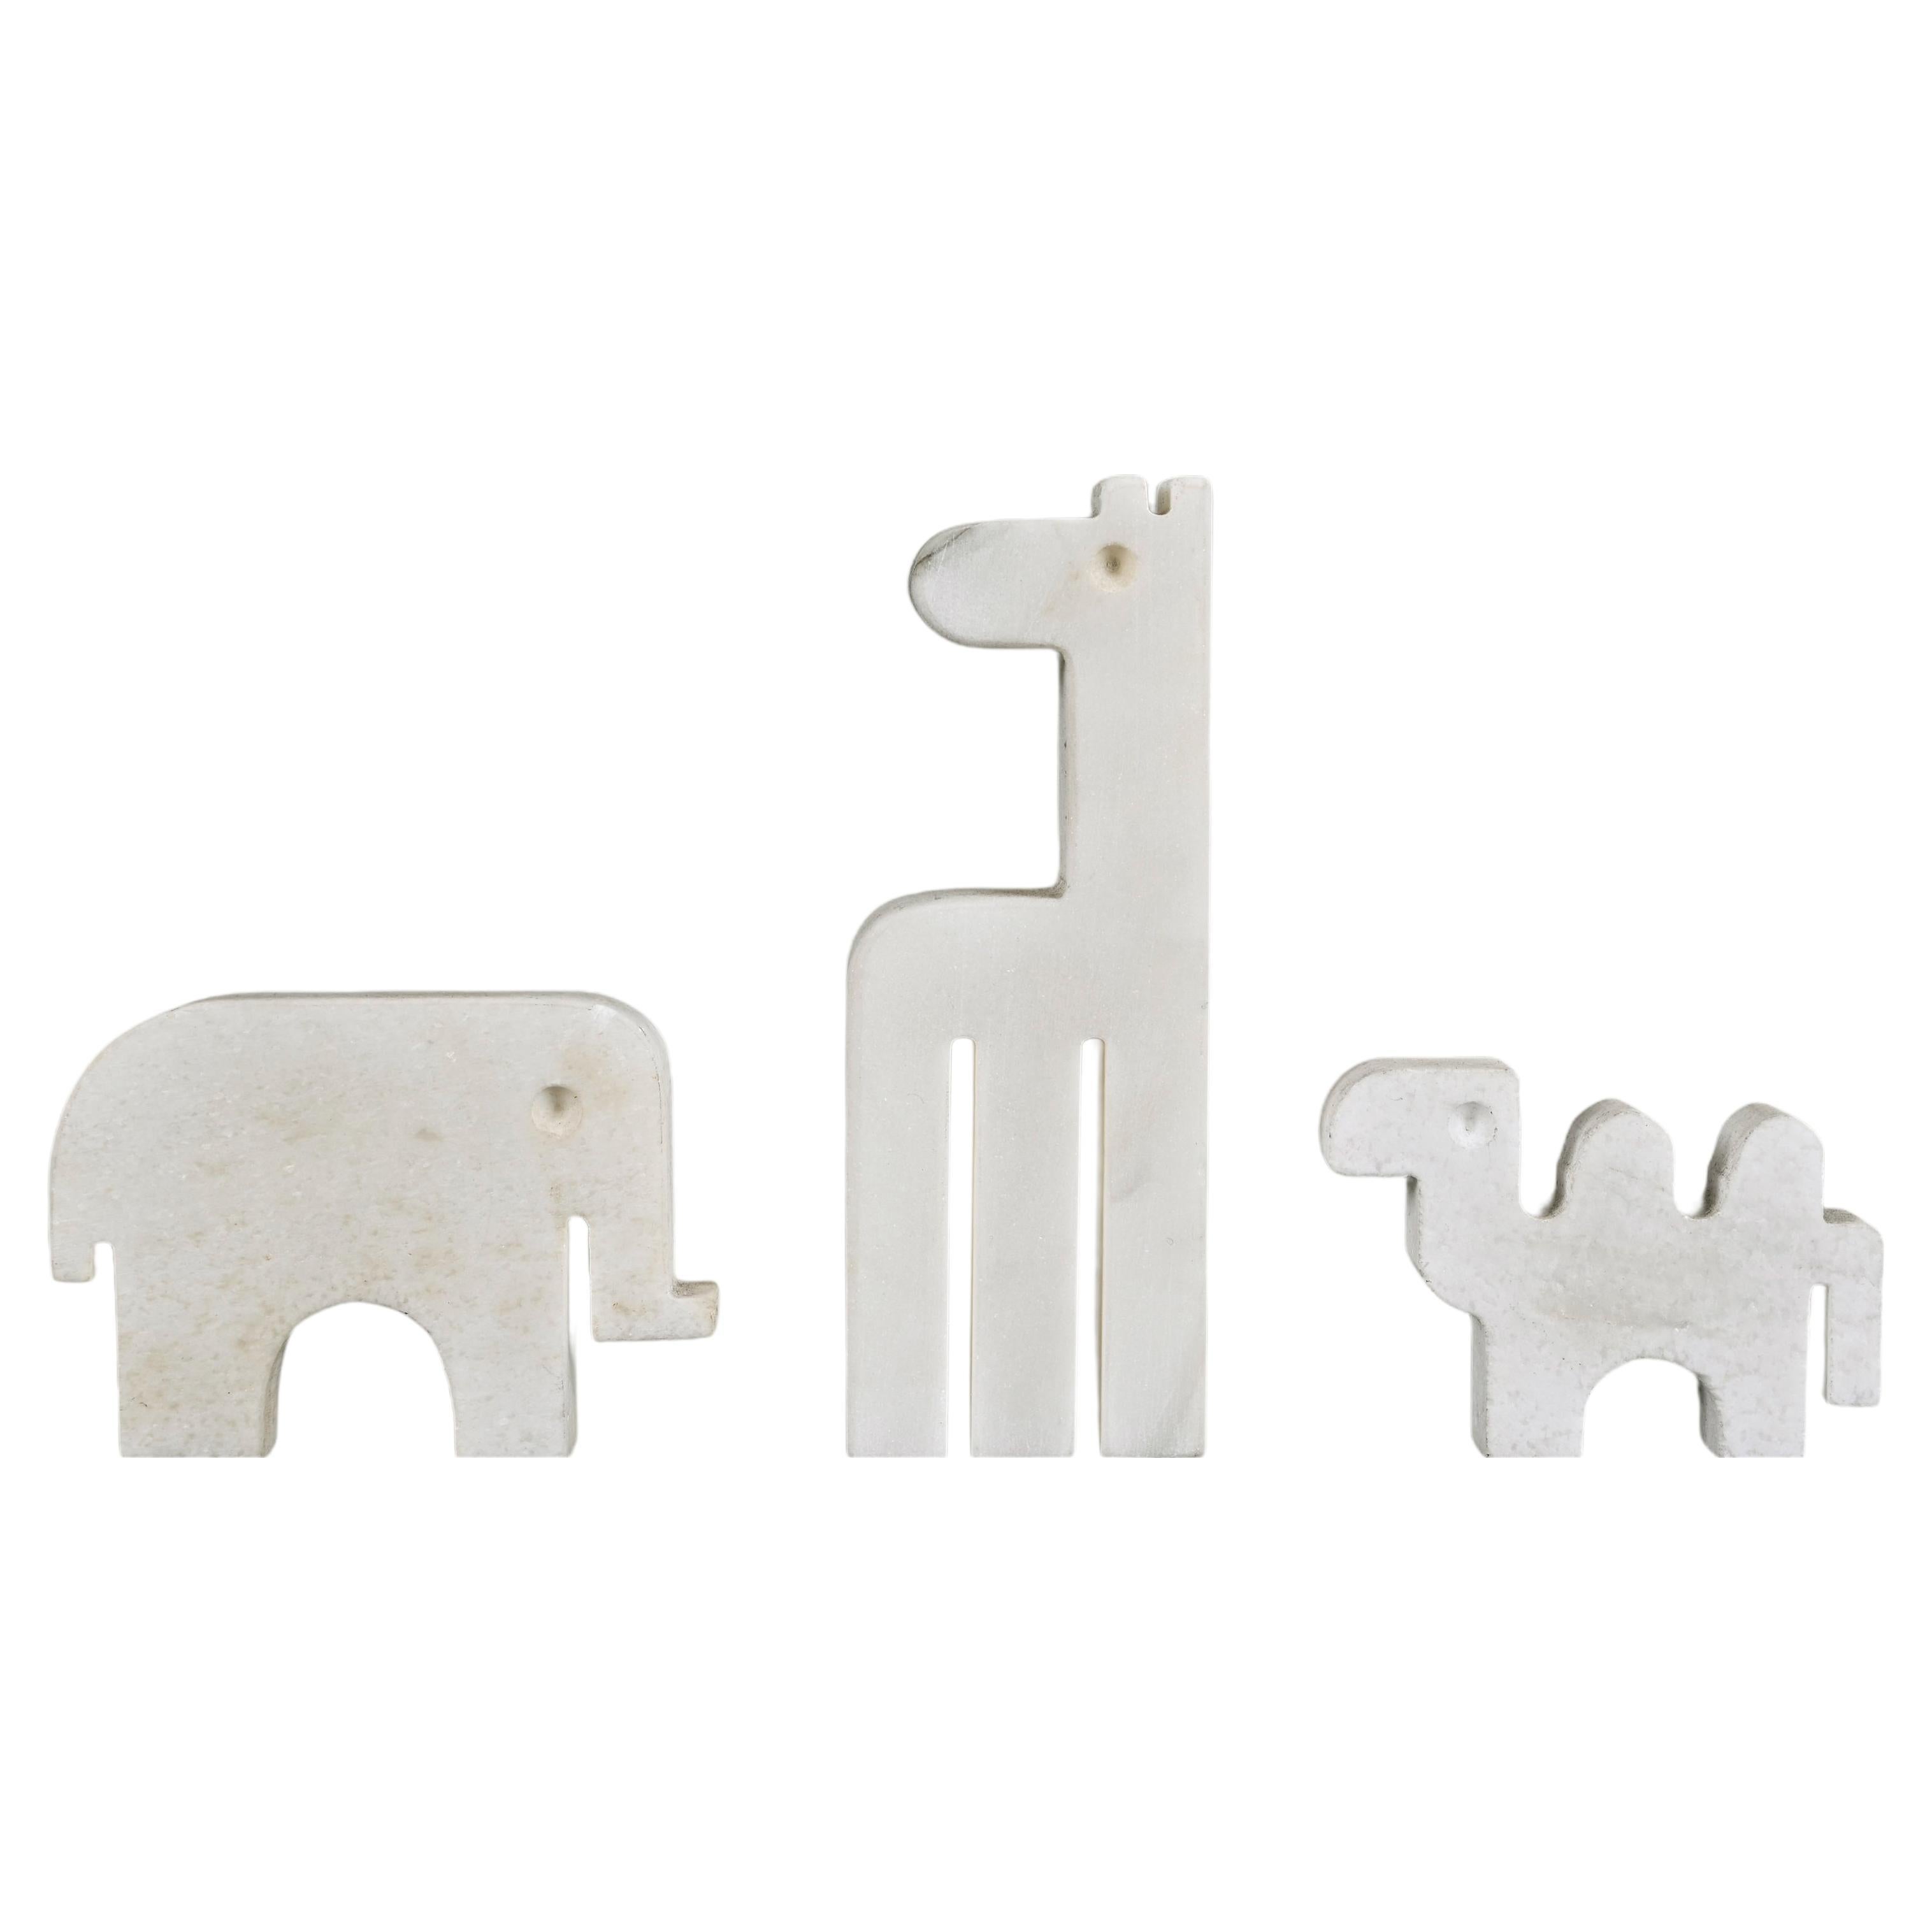 Amazing and rare set of three Carrara white marble sculptures. Fratelli Mannelli designed this fantastic set in Italy during the 1970s.

There are three elements in this set: an elephant, a giraffe and a camel. This set is extremely rare because of